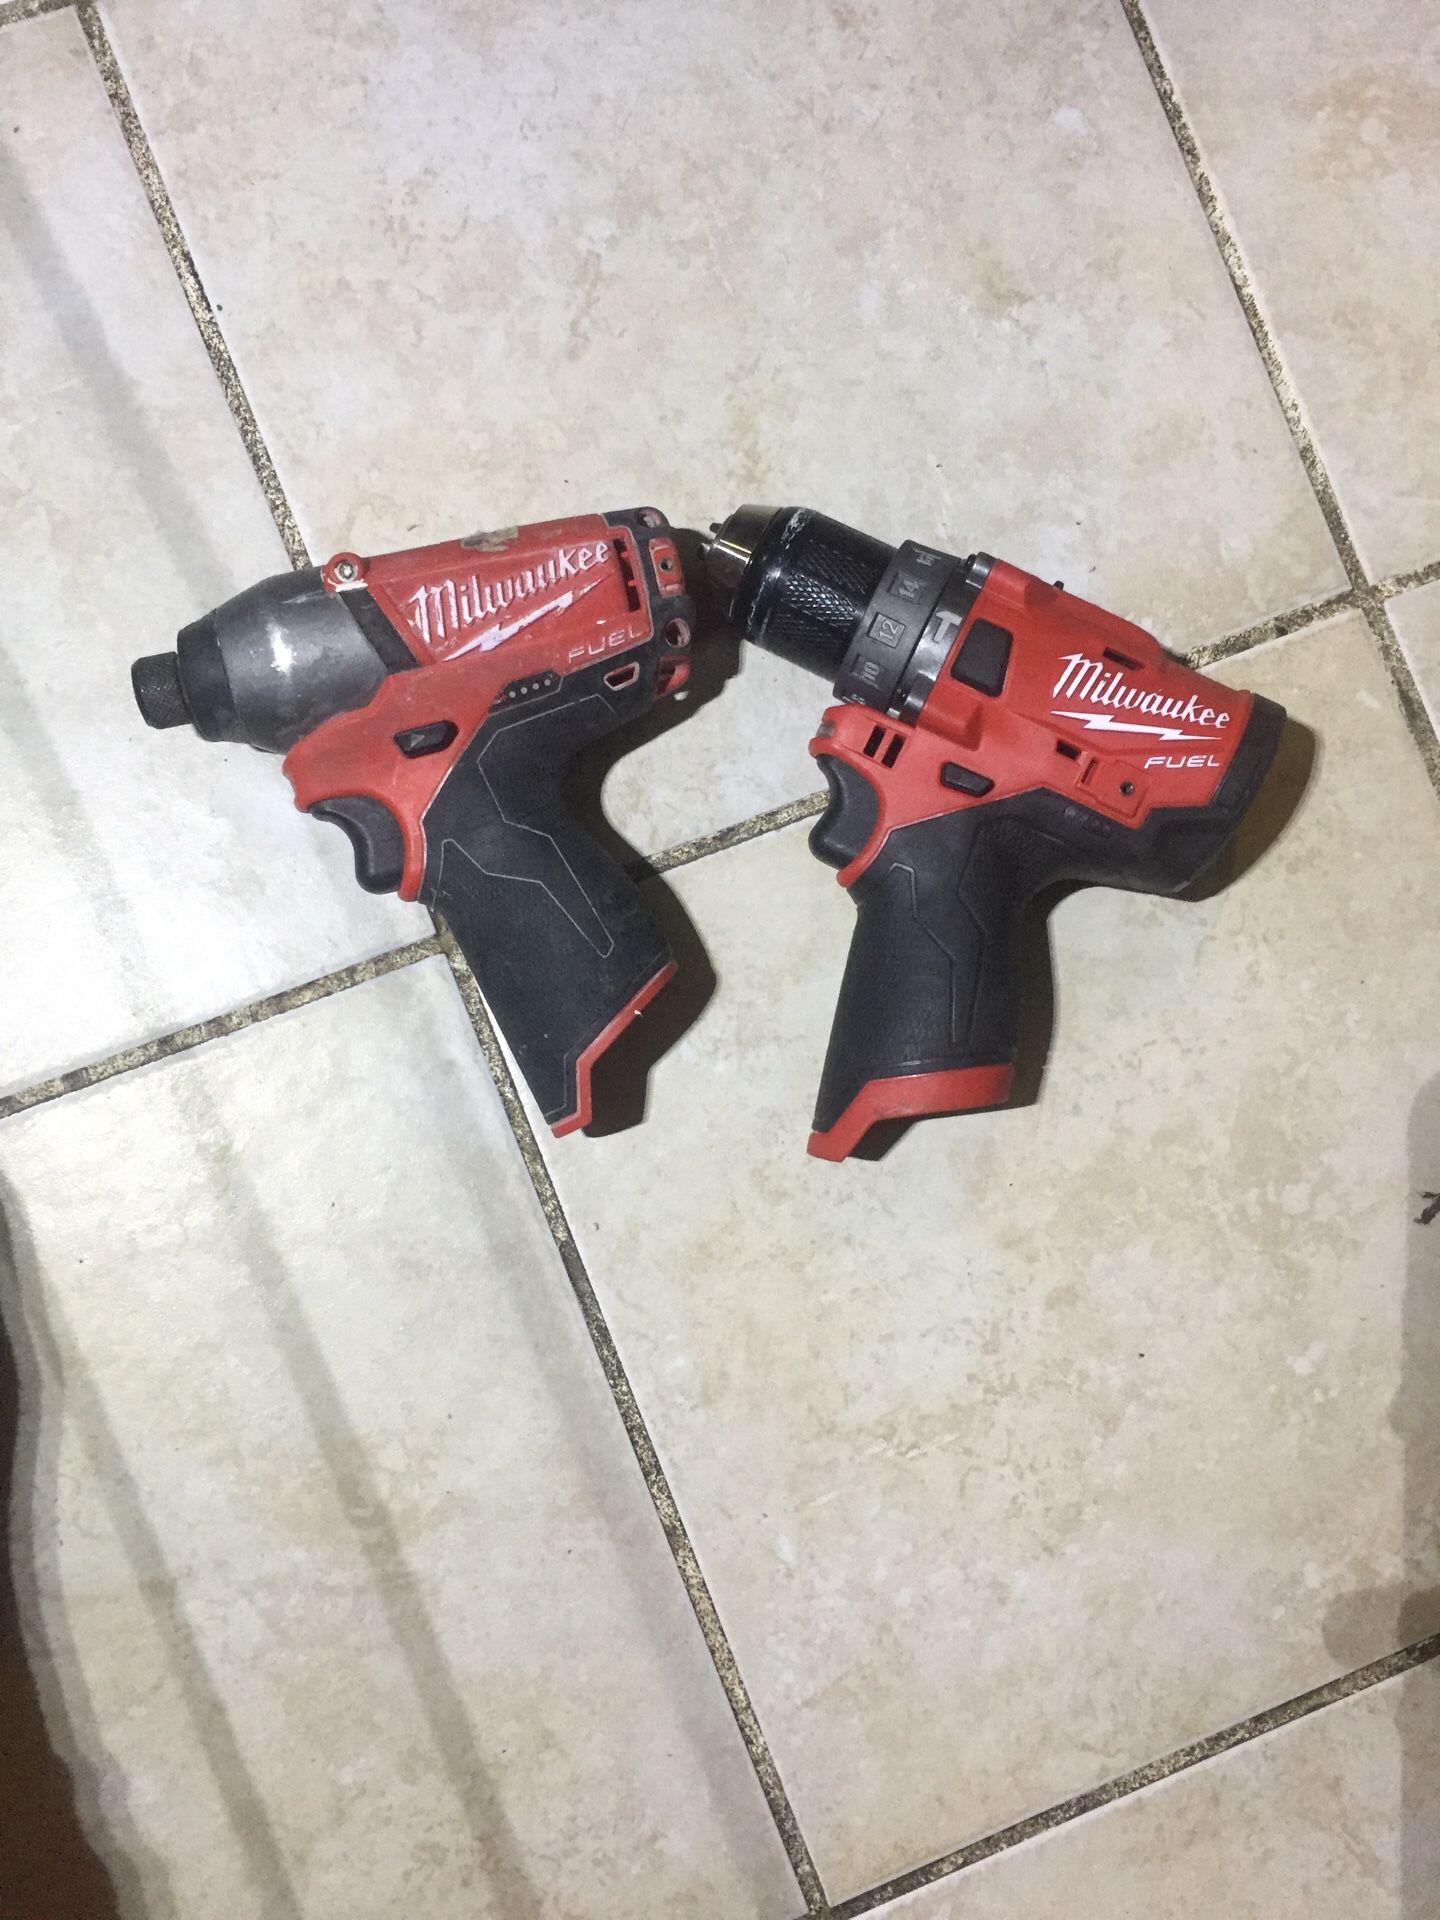 MILWAUKEE FUEL Impact Driver and Hammer Drill/Driver